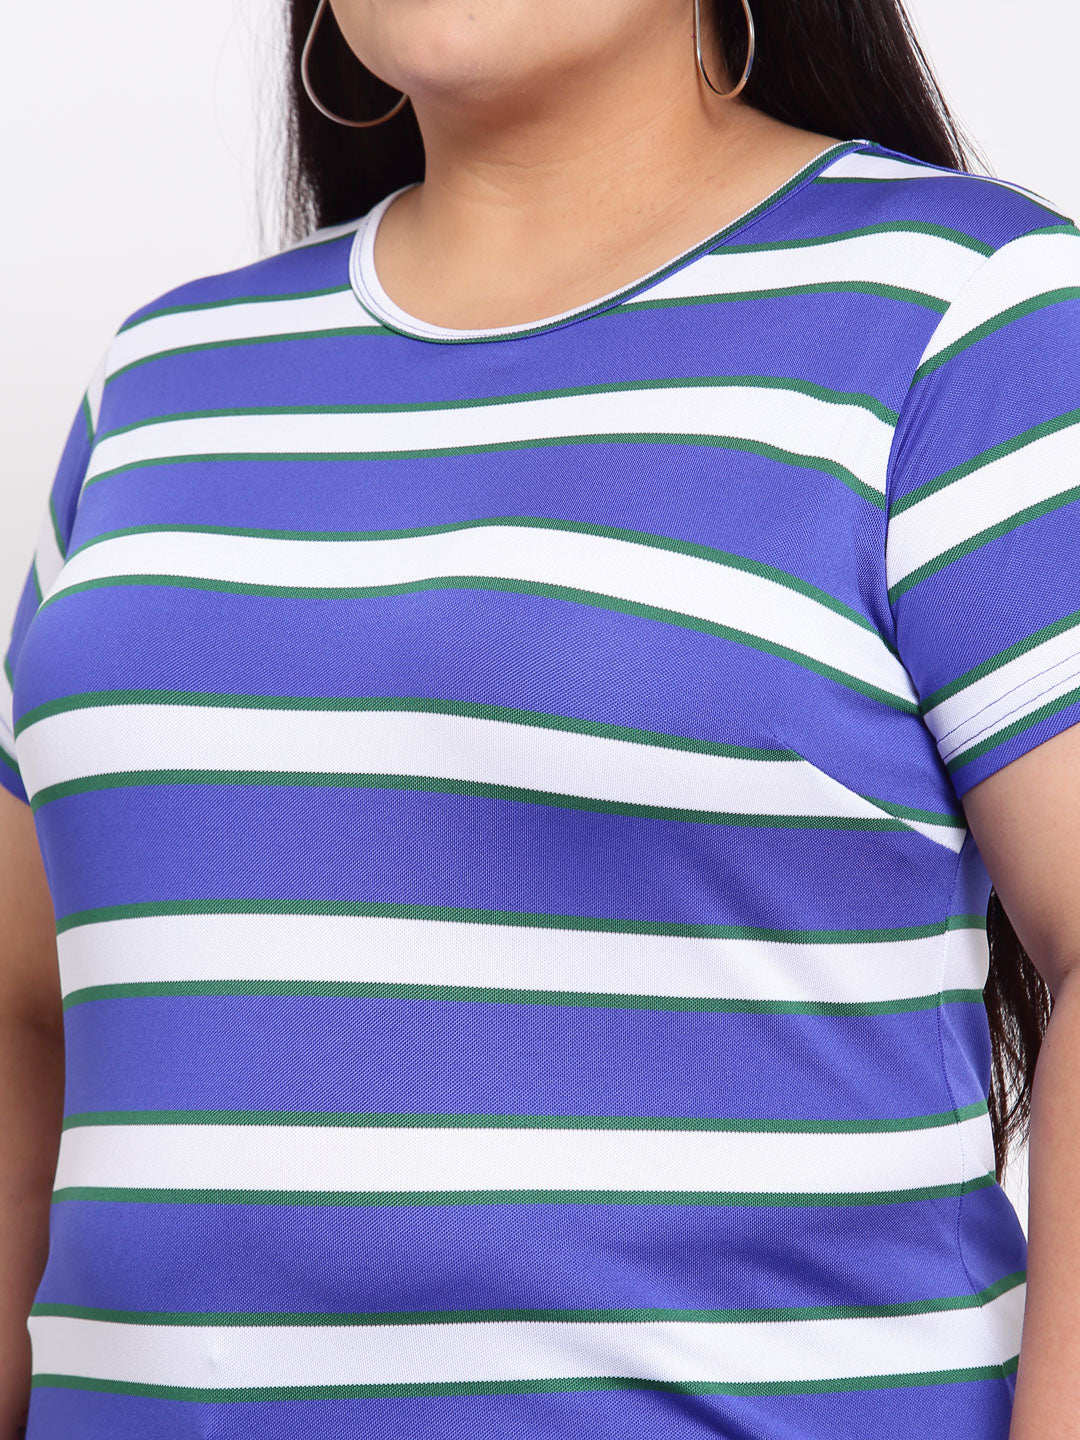 Women Blue Striped Extended Sleeves T-shirt